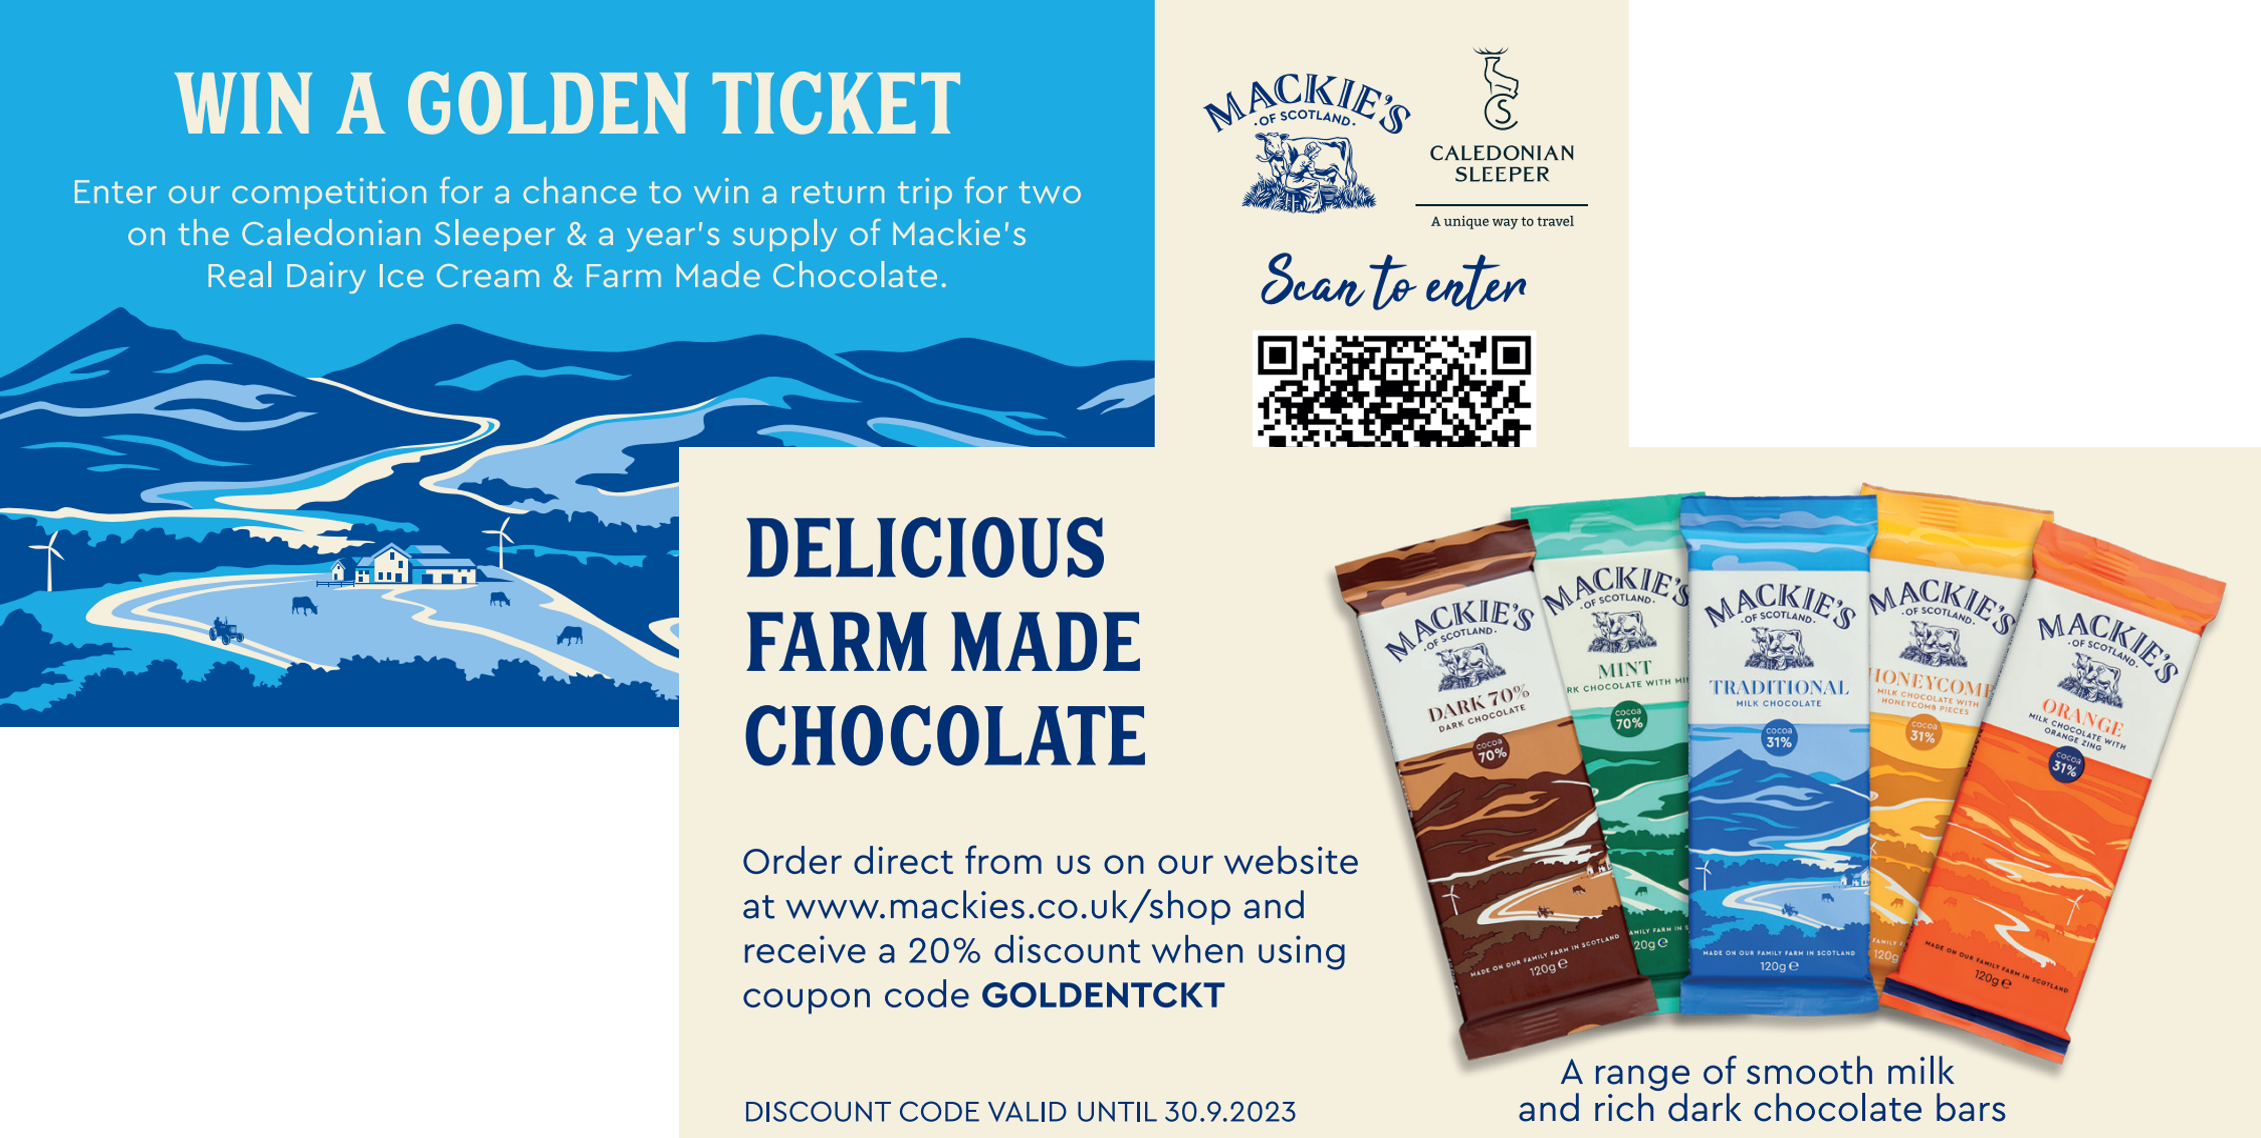 Caledonian Sleeper and Mackie's golden tickets